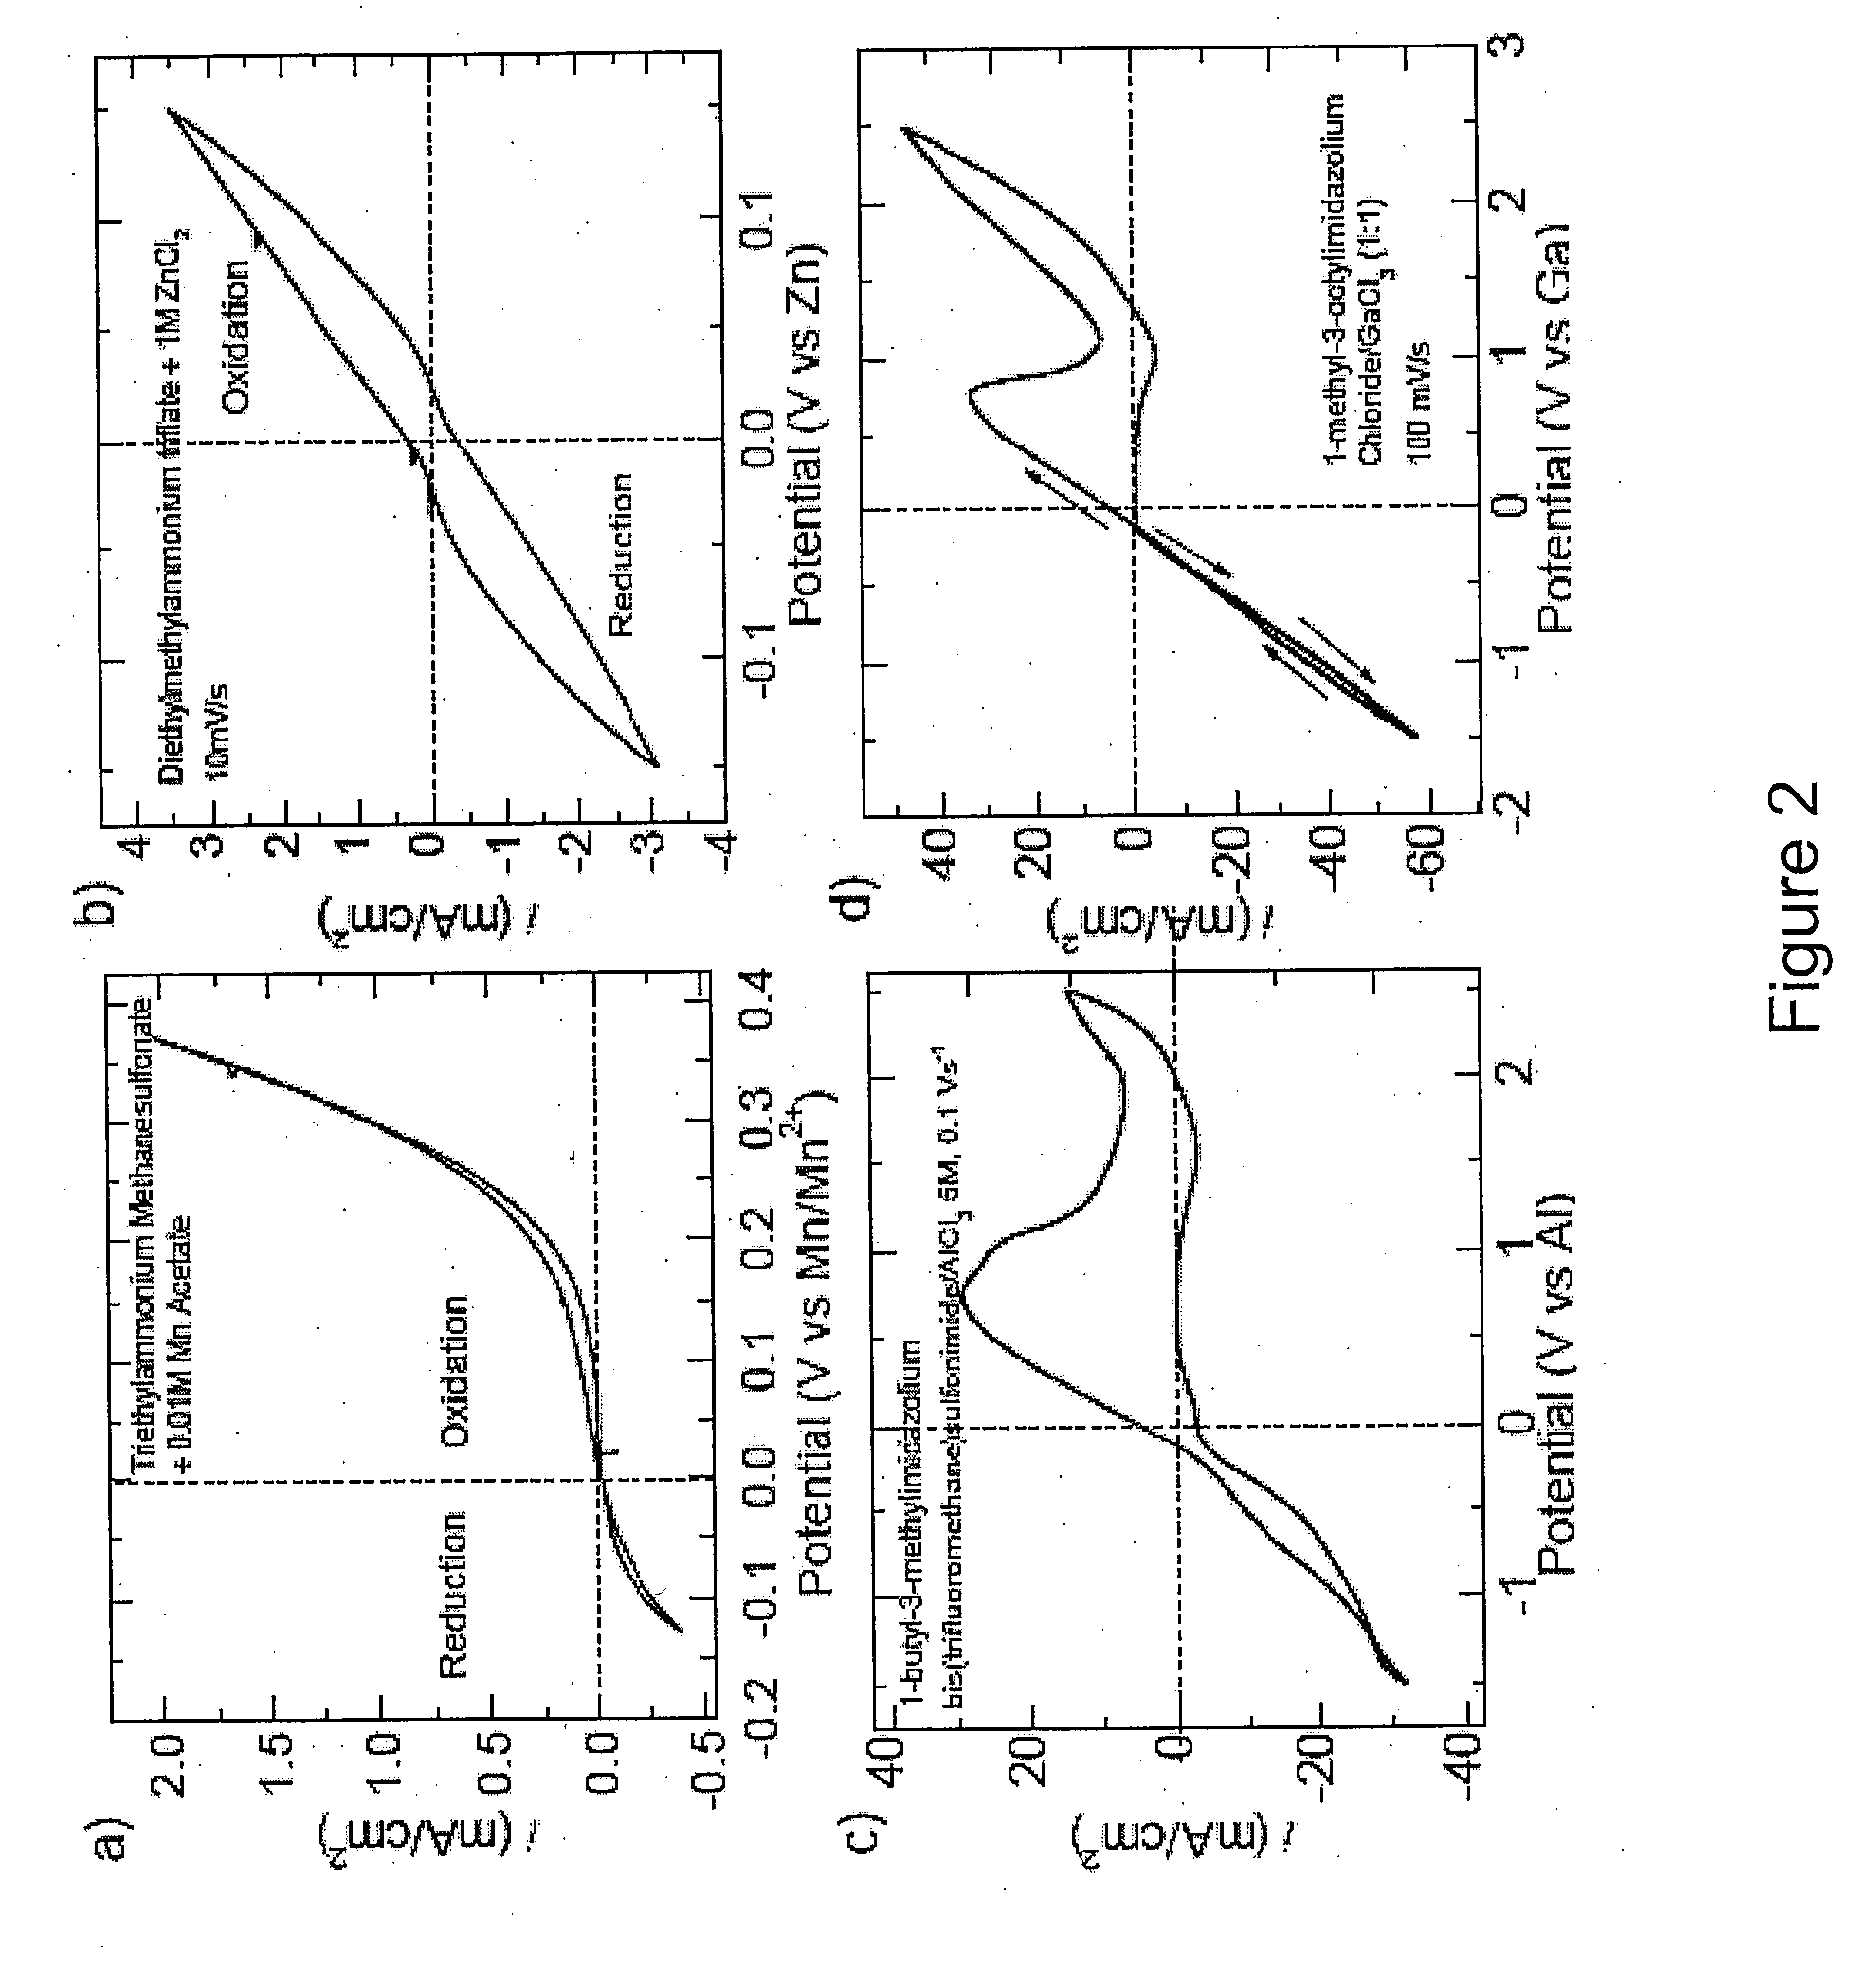 Metal-air cell with performance enhancing additive